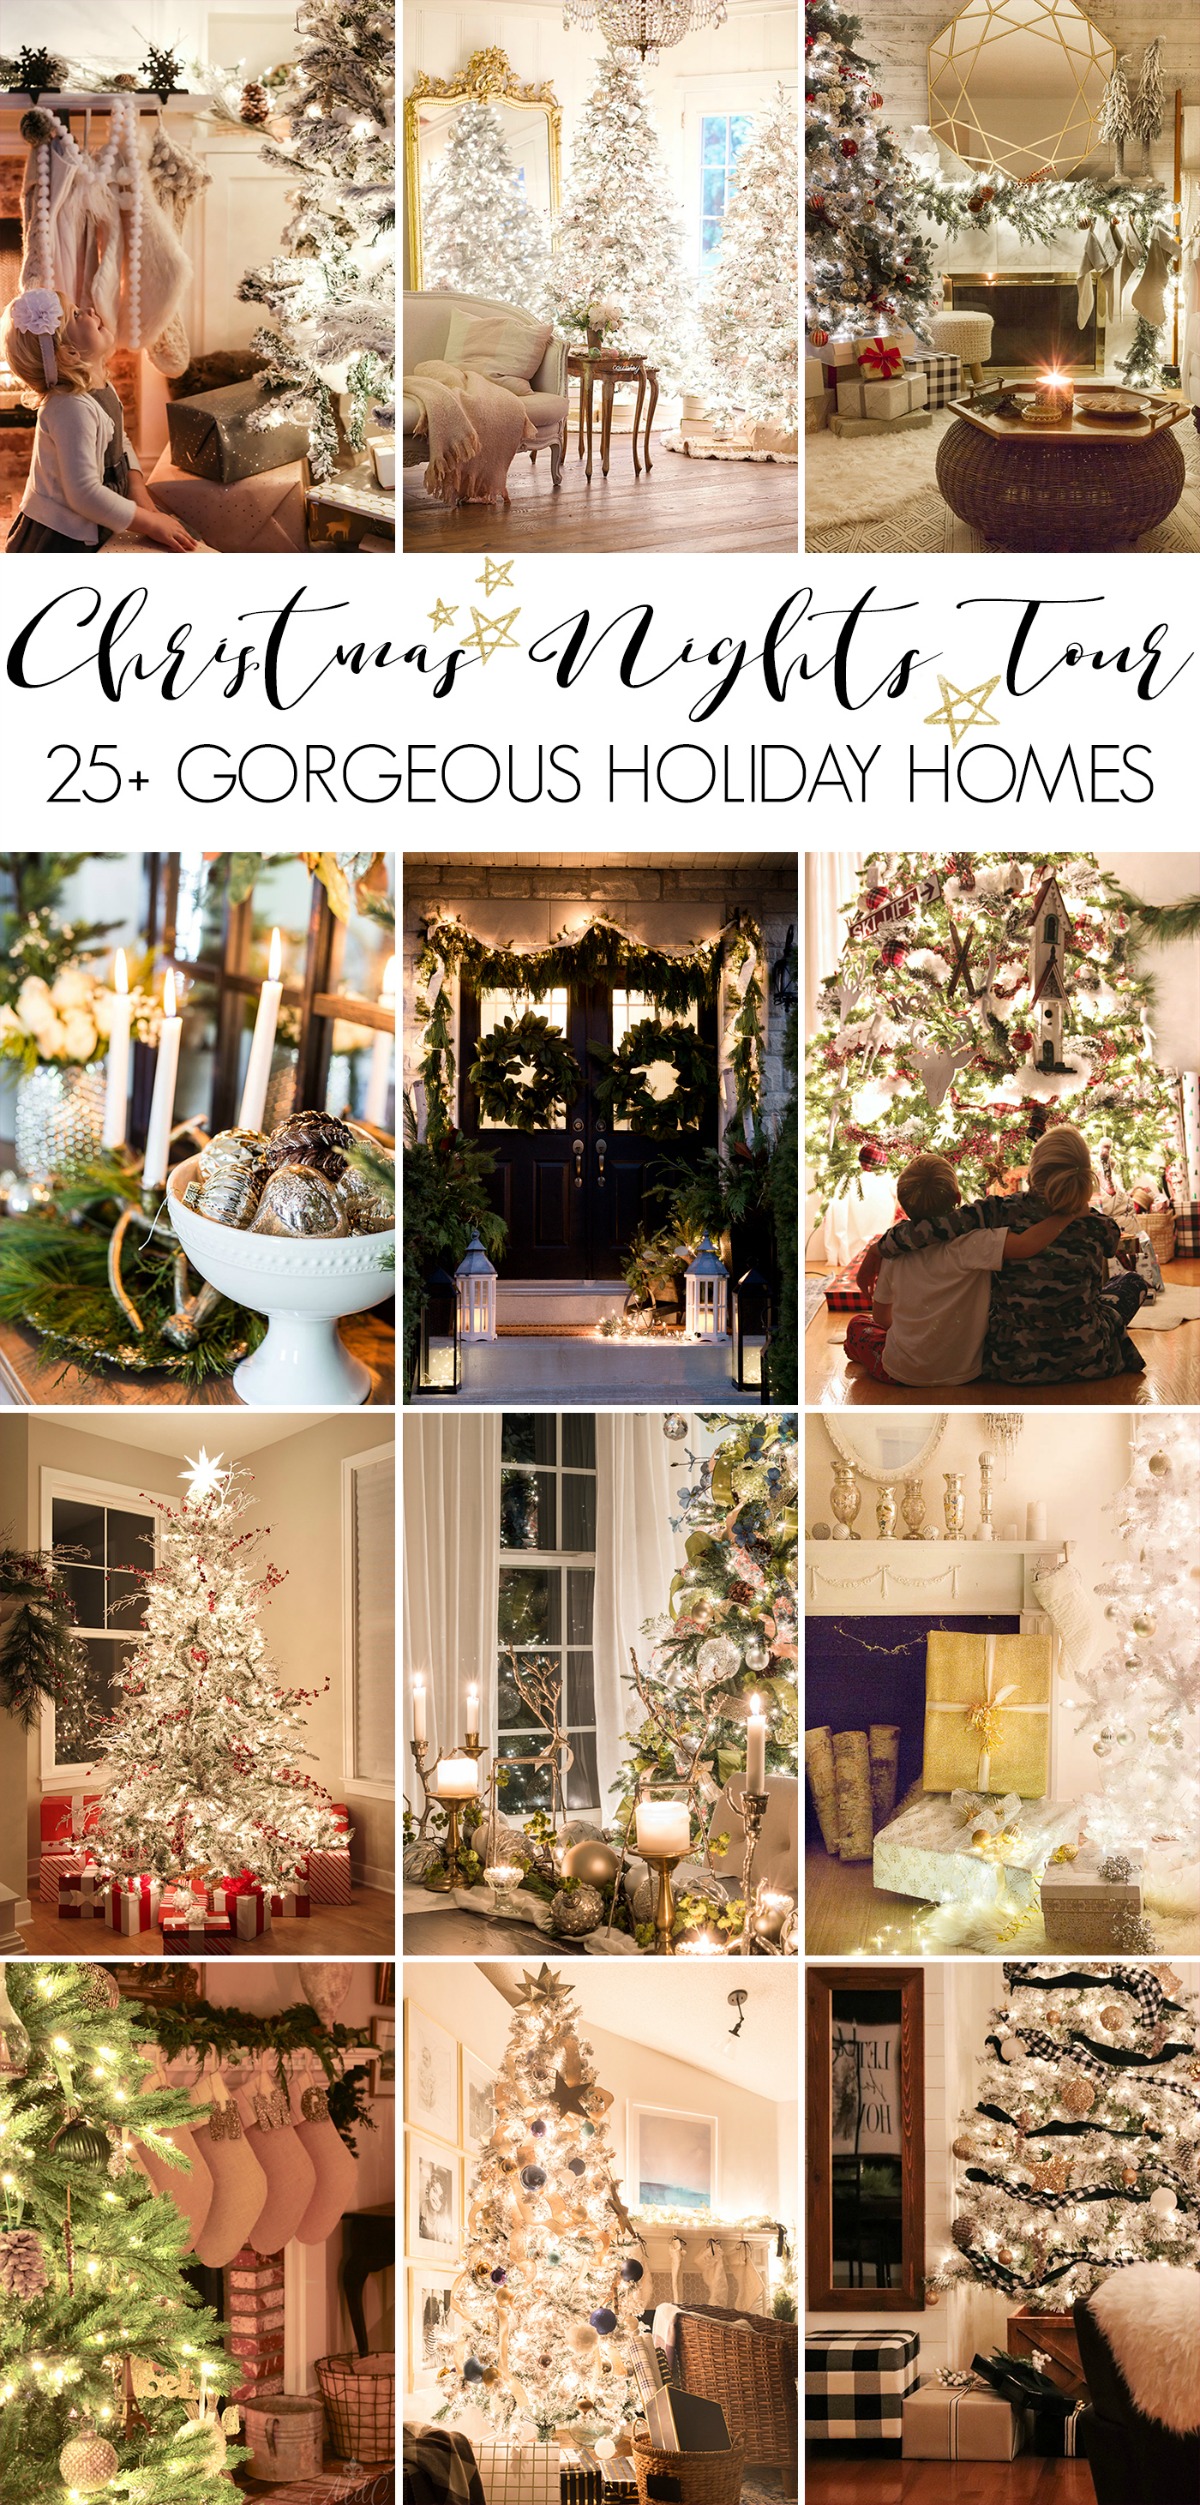 20 gorgeous holiday homes graphic.